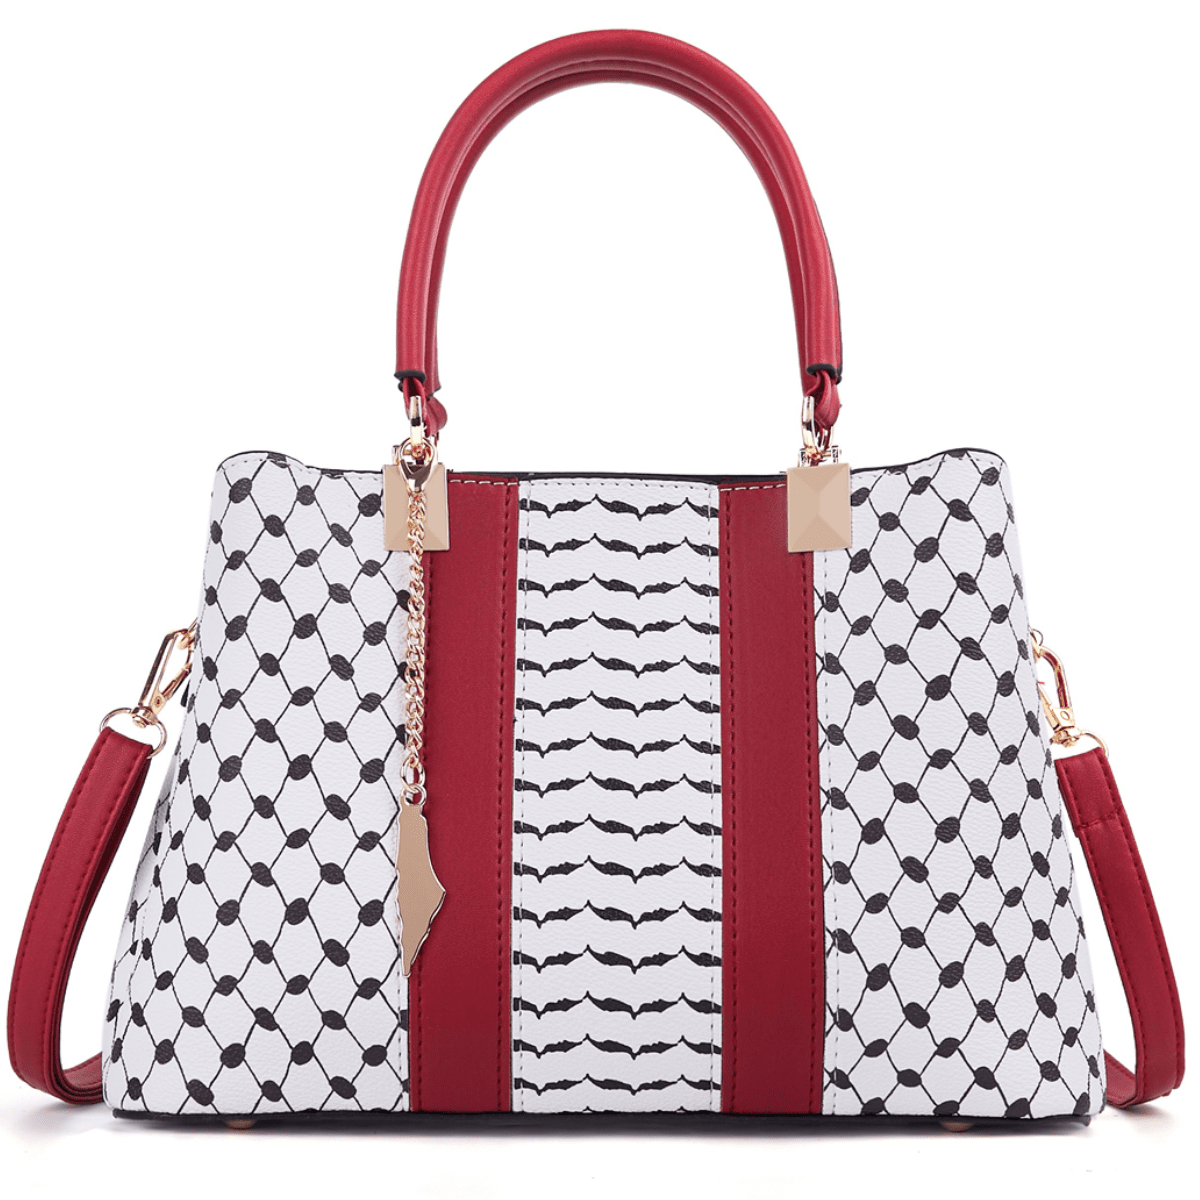 Exclusive Handbag Inspired by the Keffiyeh – A Symbol of Heritage and Style